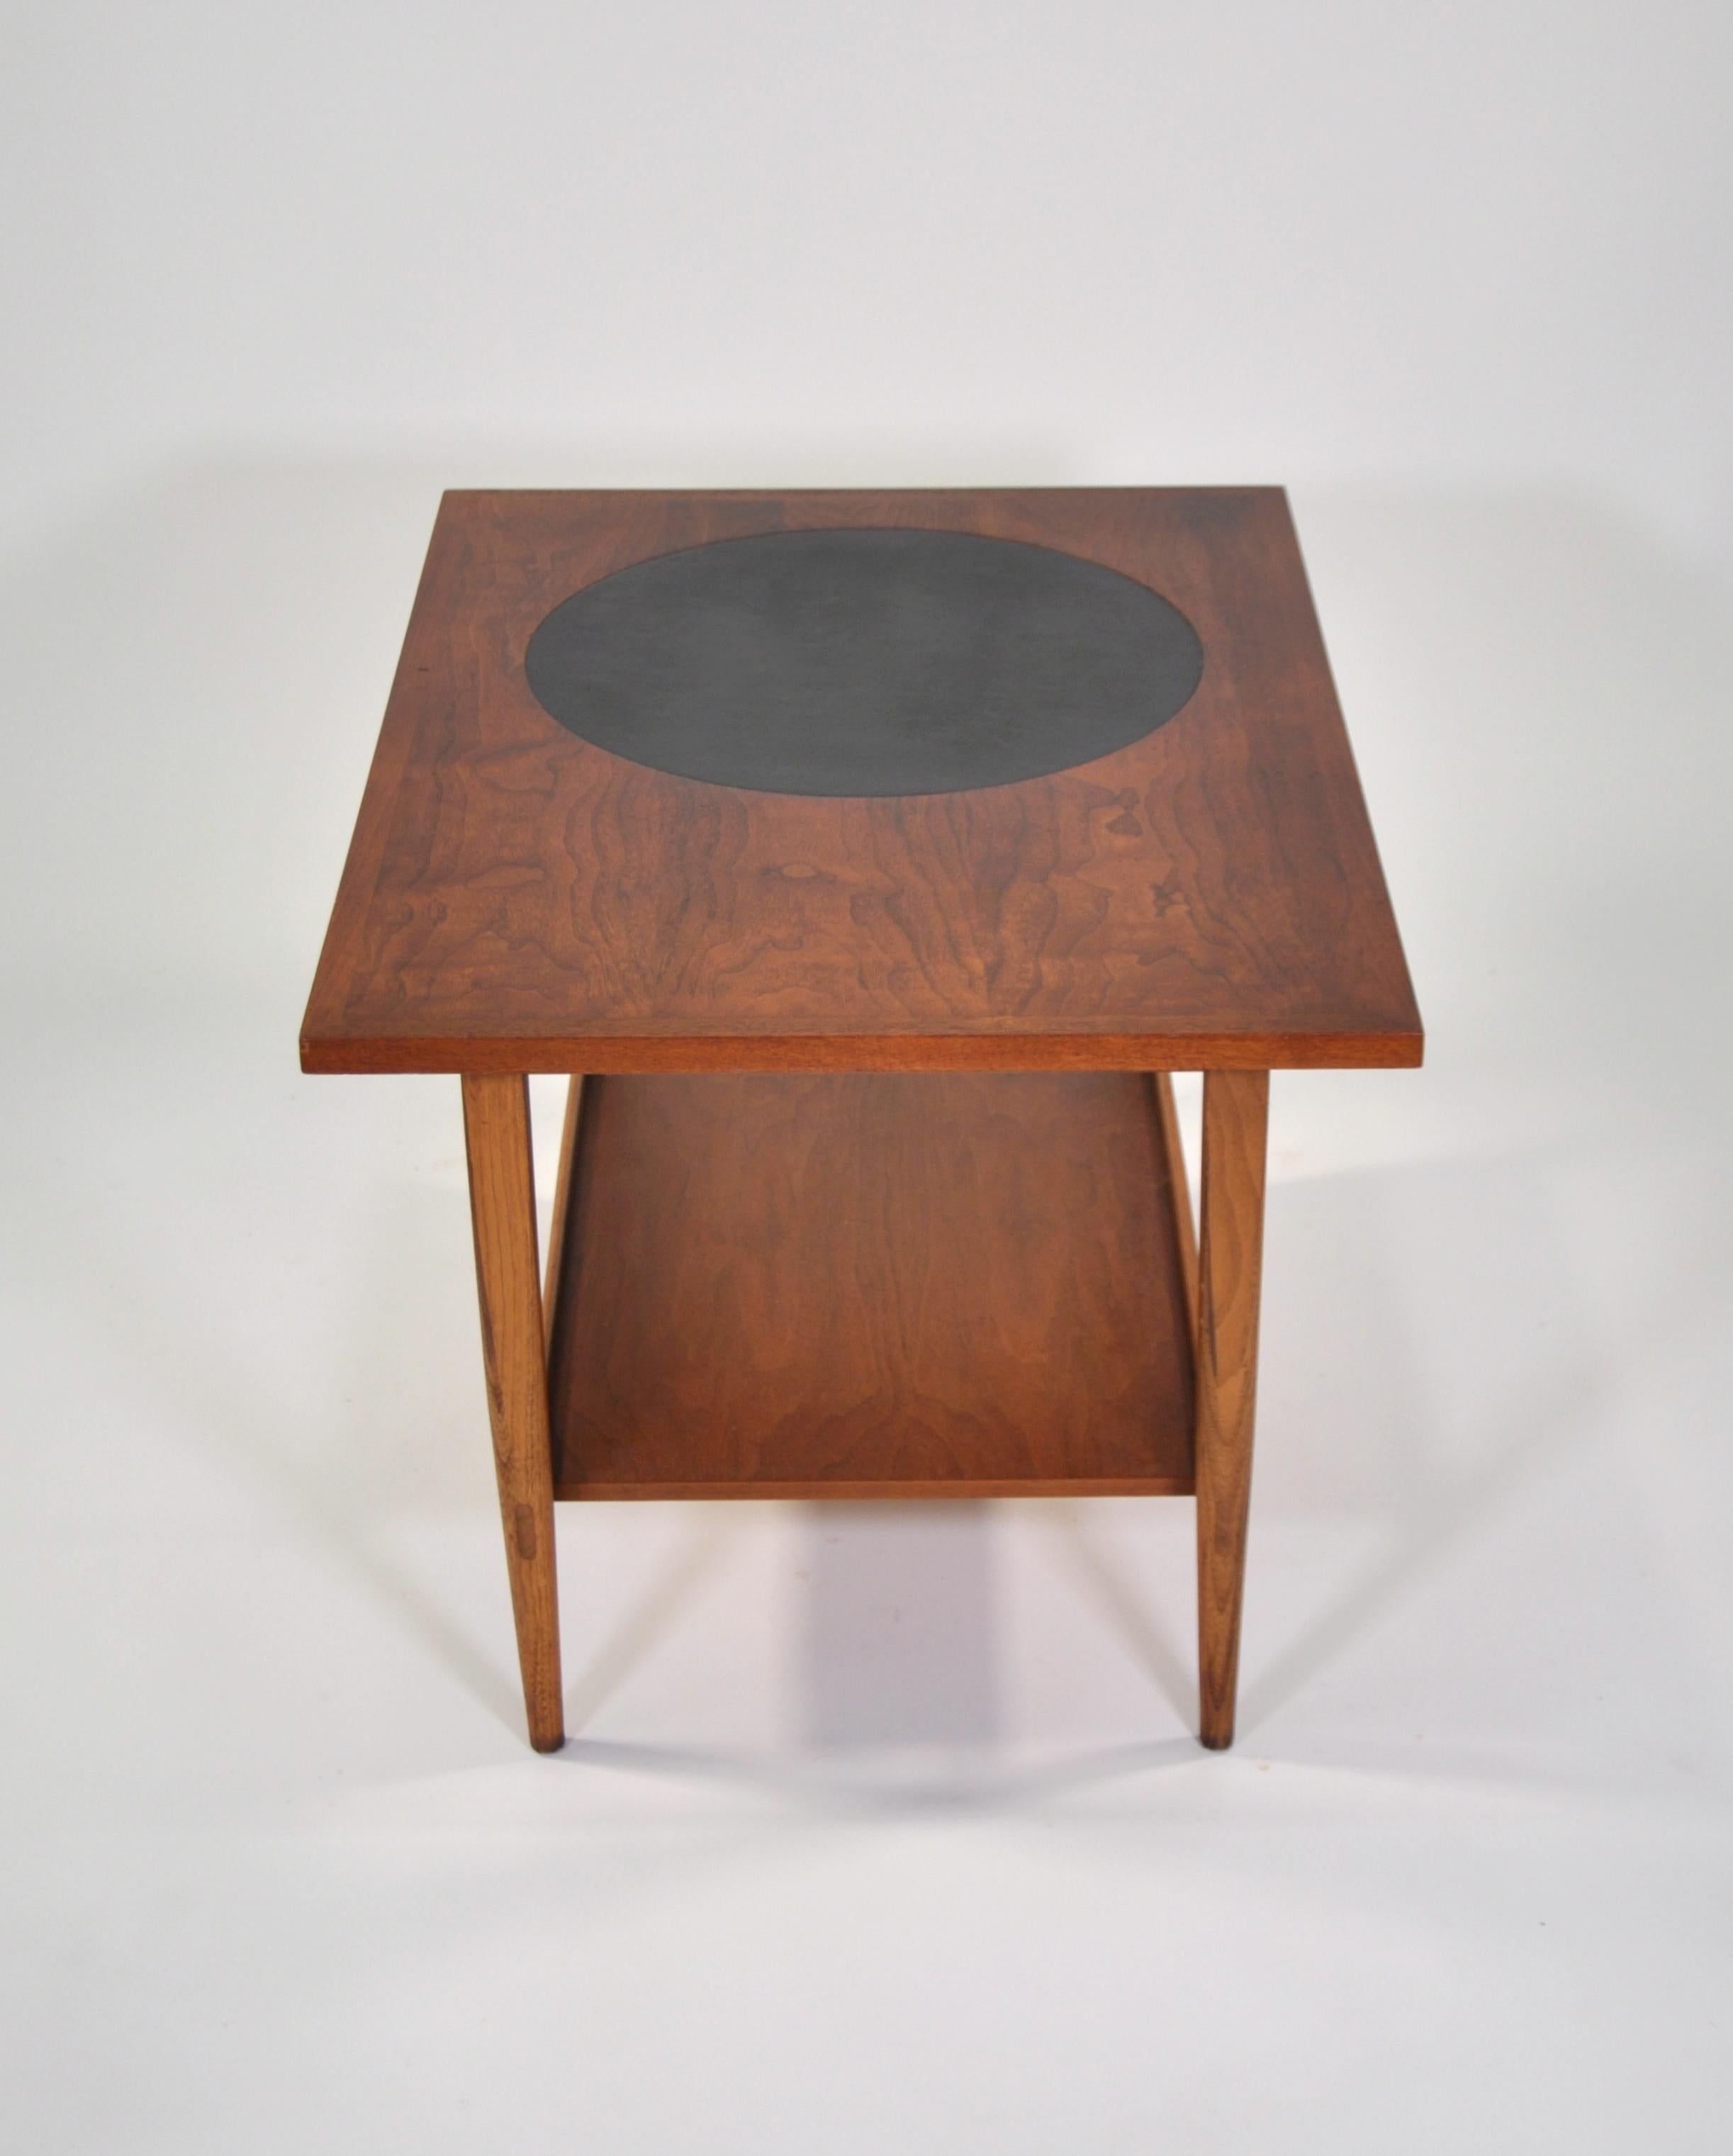 A rare vintage Mid-Century Modern end table designed for the Lane Signature collection by Paul McCobb, model 1001-05, dating from 1962. The occasional table features an inset round black leather top, highly figured grain and elegantly tapered legs.